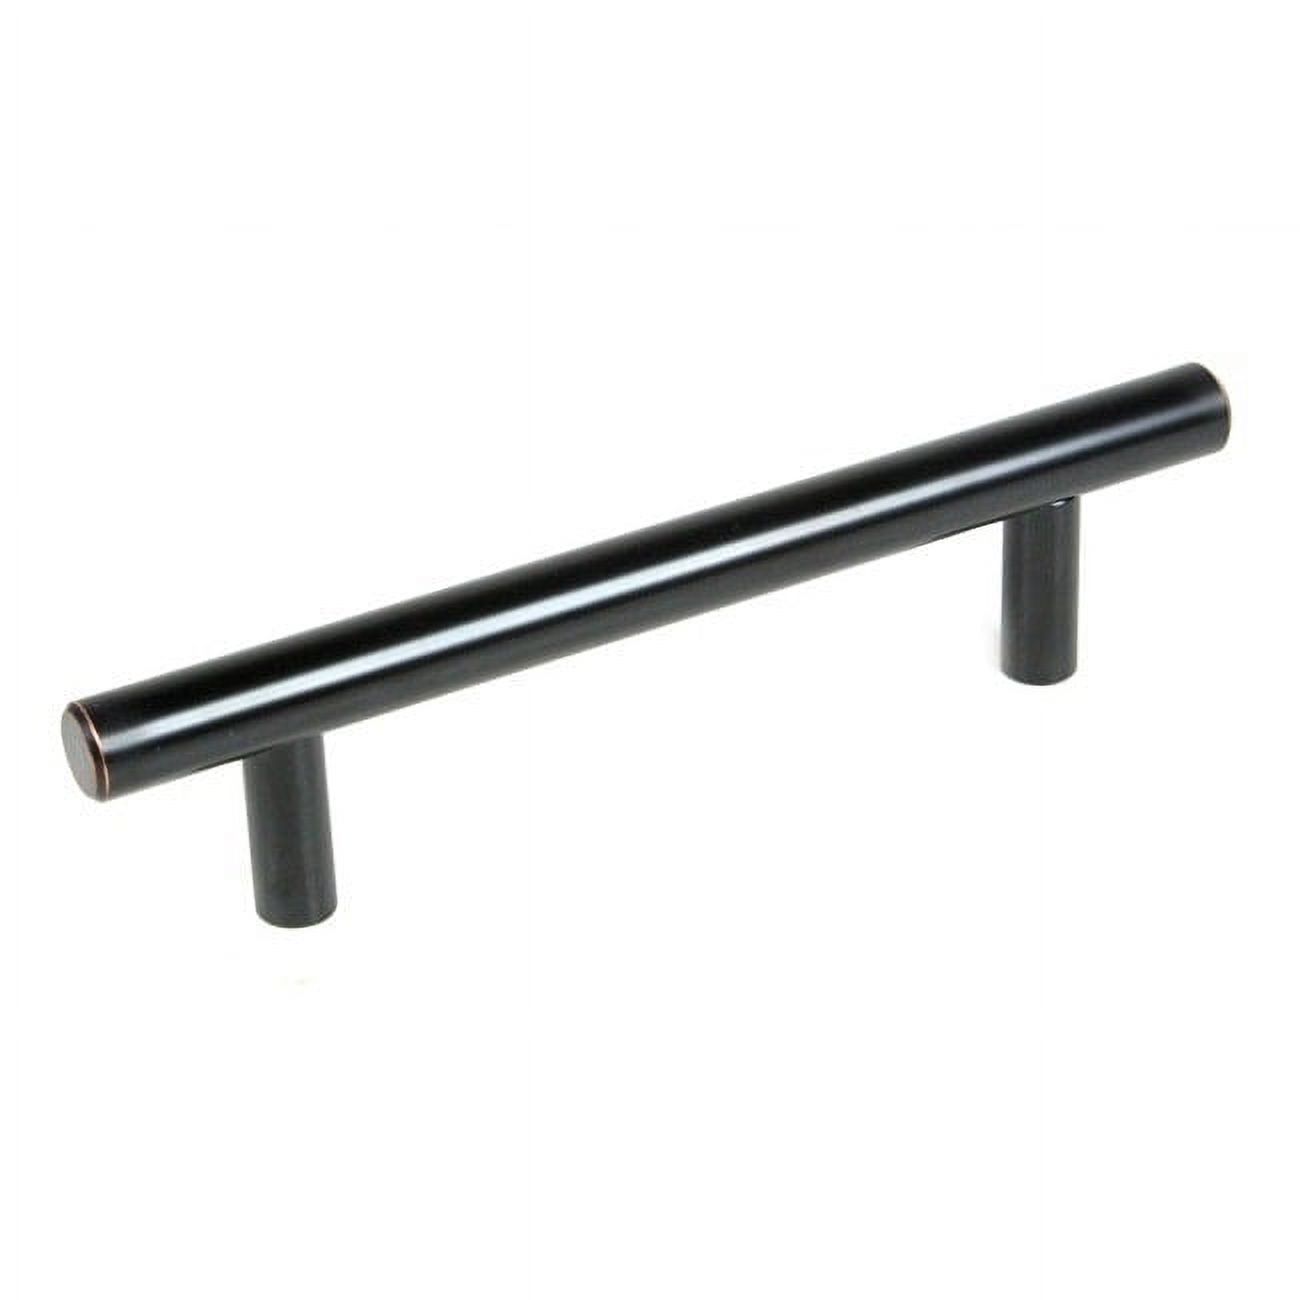 6" Solid Oil Rubbed Bronze Cabinet Bar Pull Handle 6-inch (150mm) Solid Oil Rubbed Bronze Cabinet Bar Pull Handles (Case of 5) - image 2 of 5